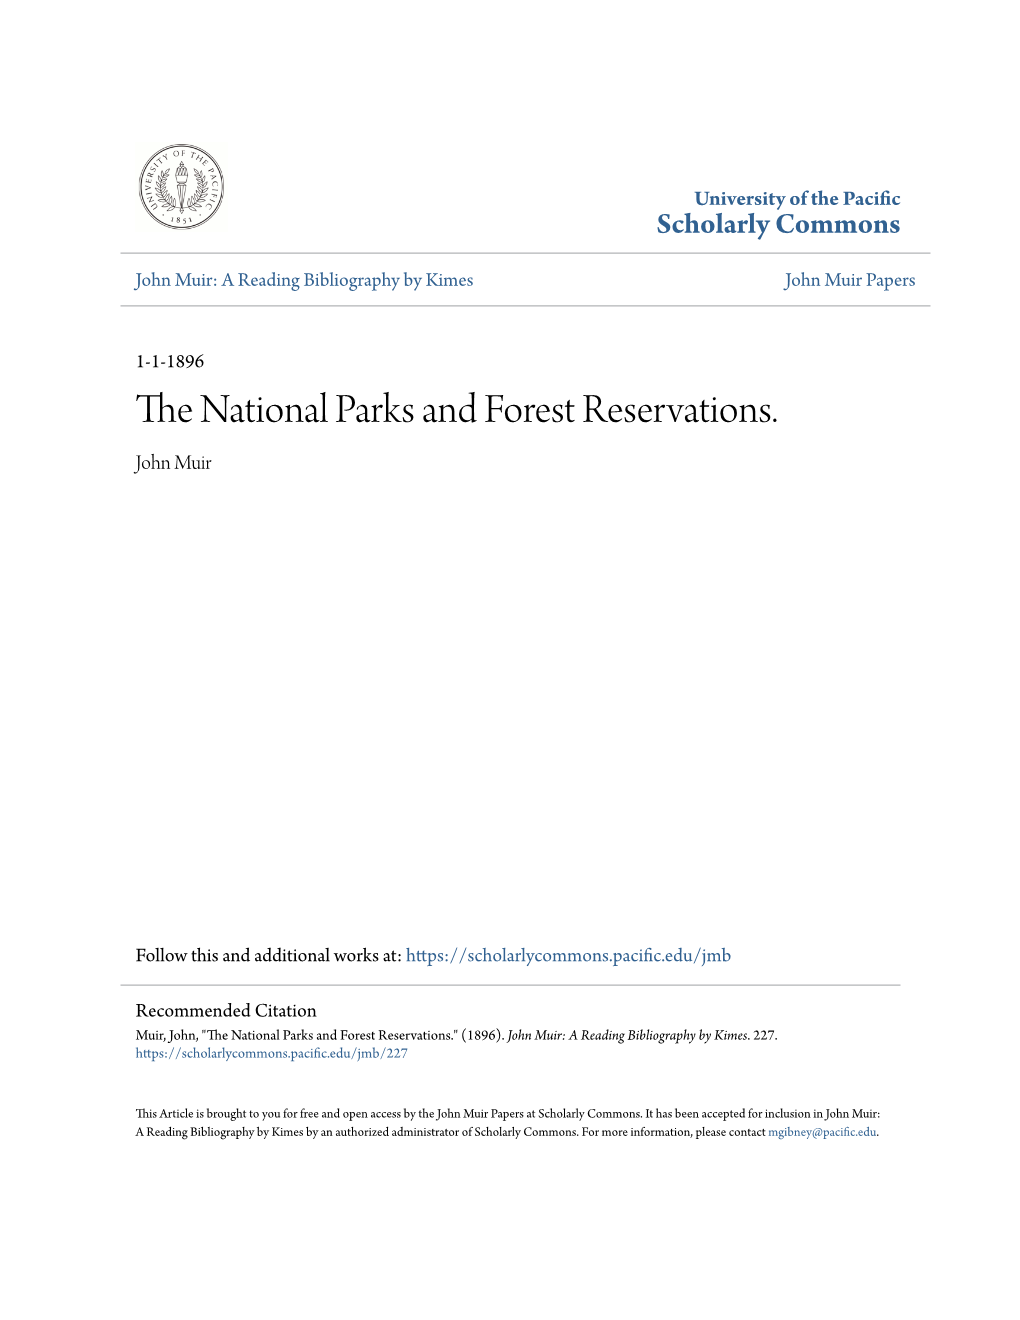 The National Parks and Forest Reservations